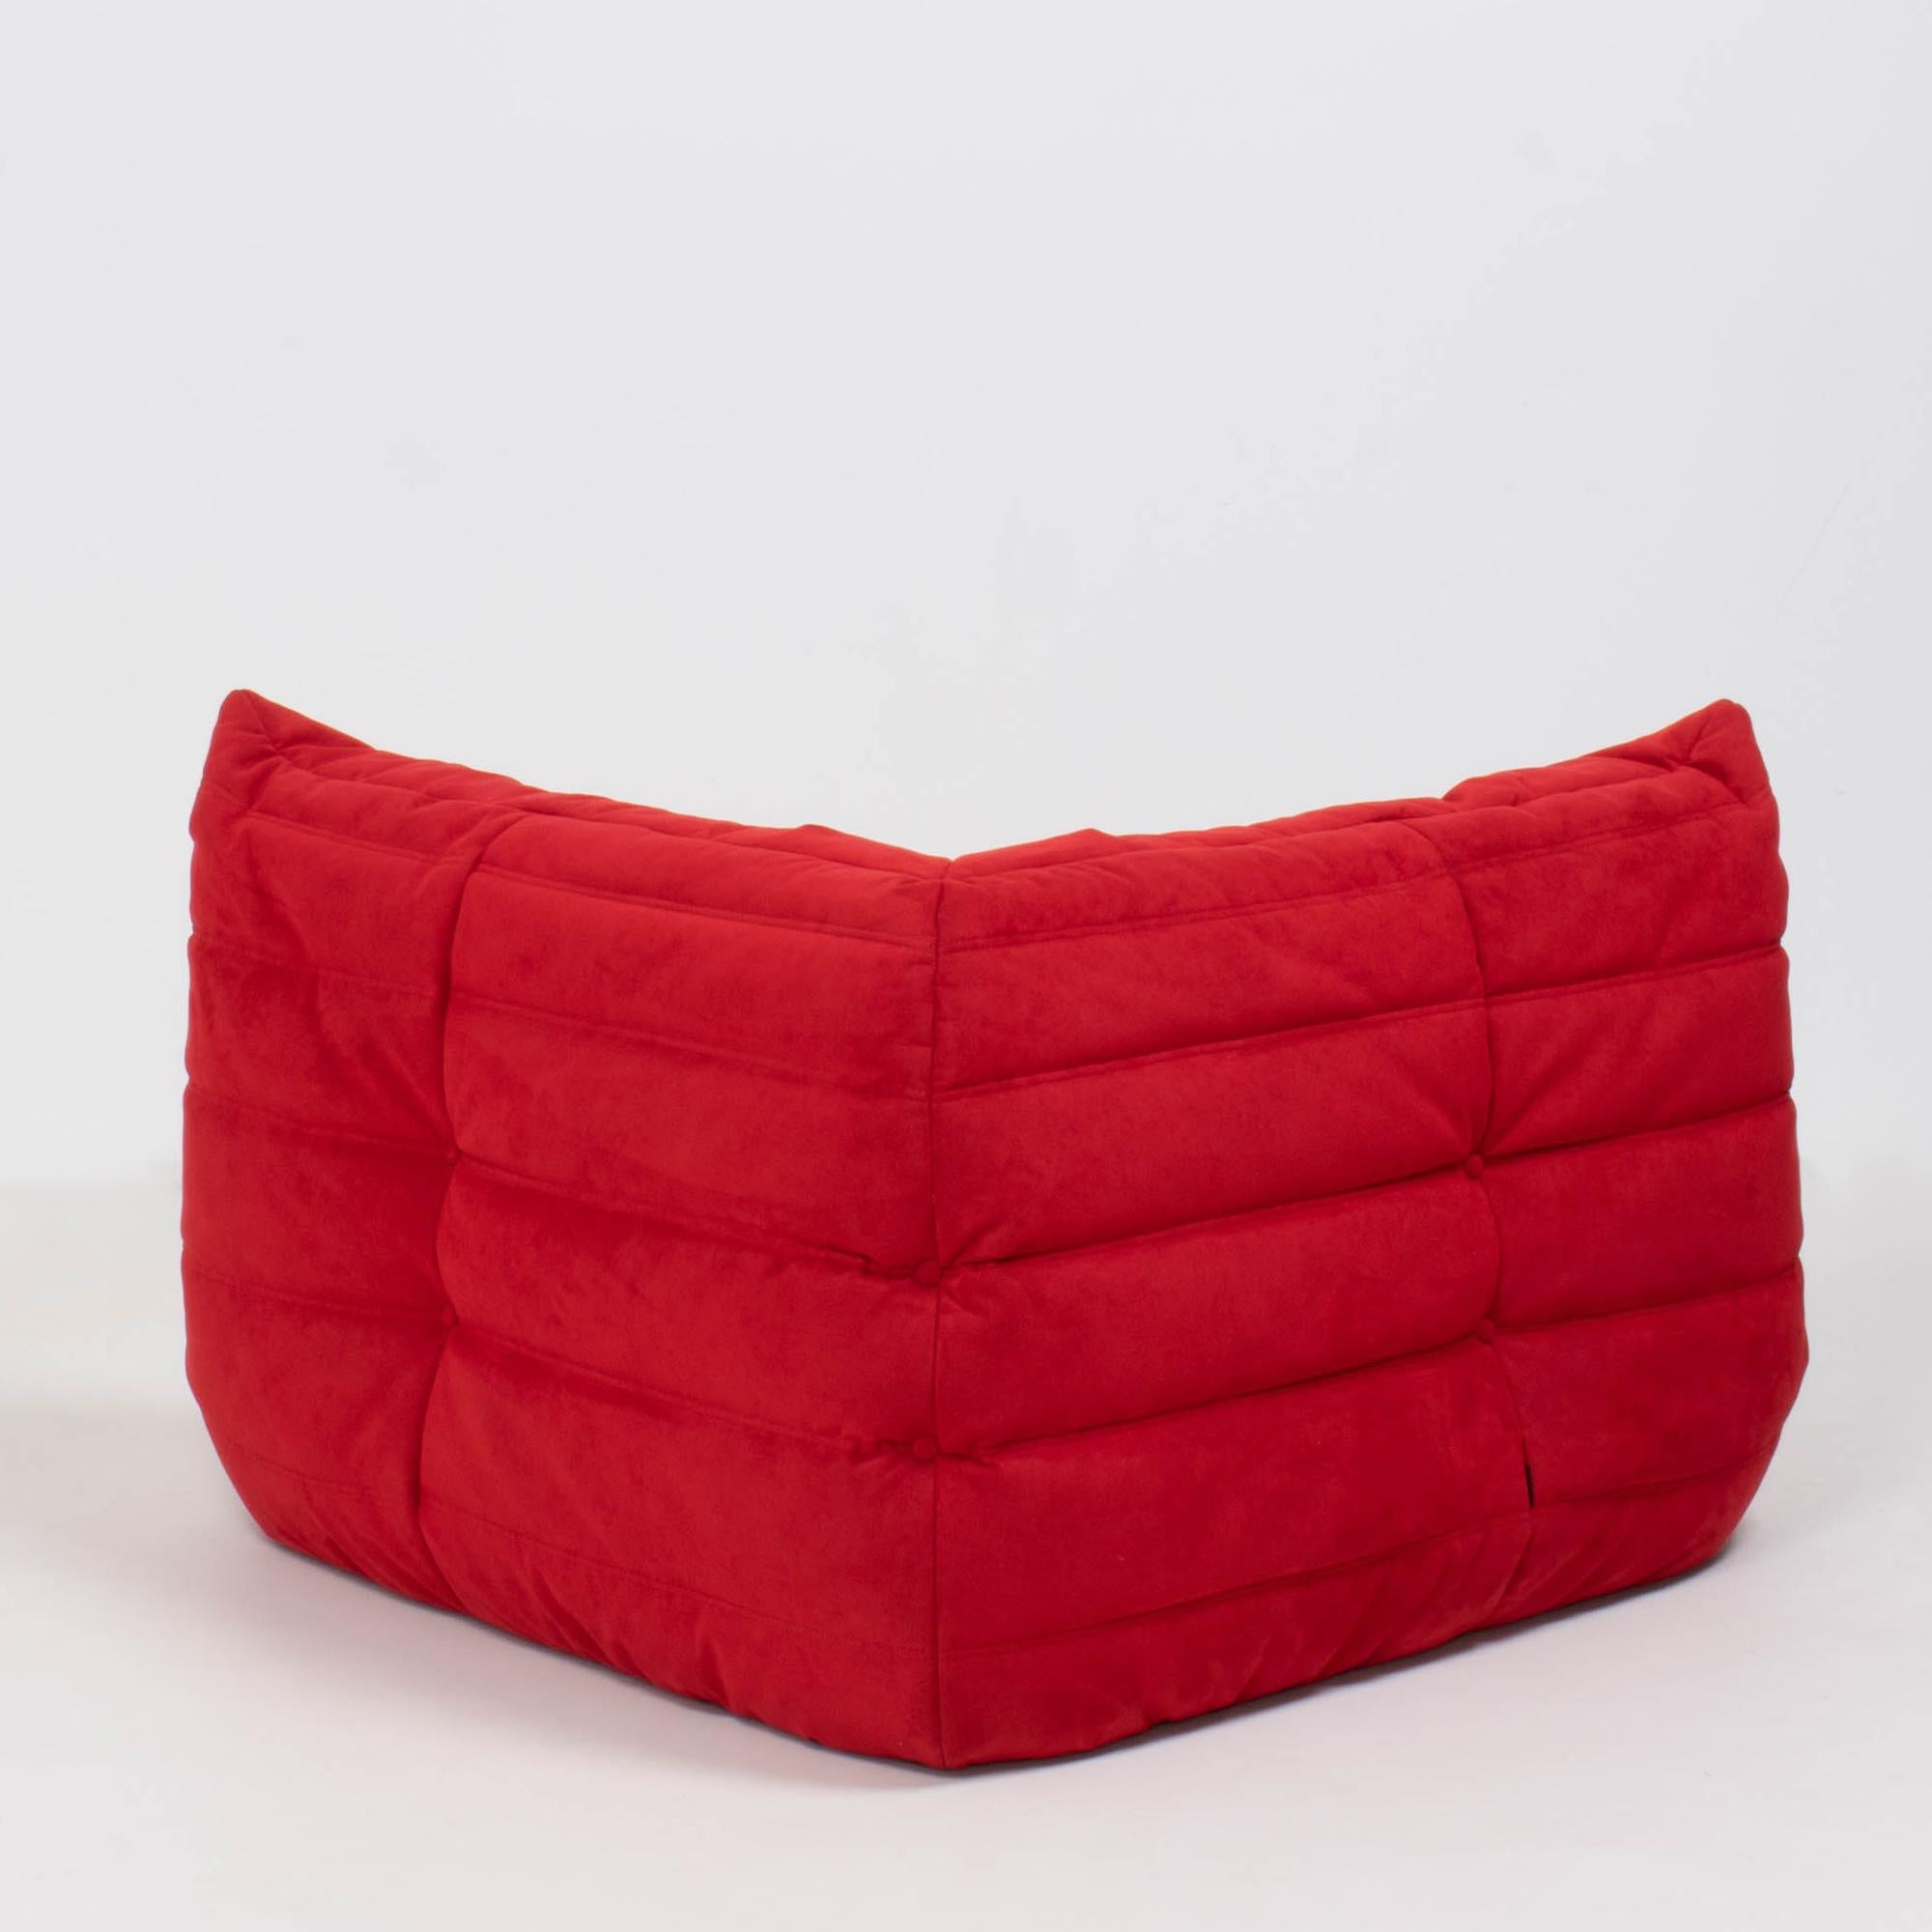 Fabric Ligne Roset by Michel Ducaroy Togo Red Modular Sofa and Footstool, Set of 4